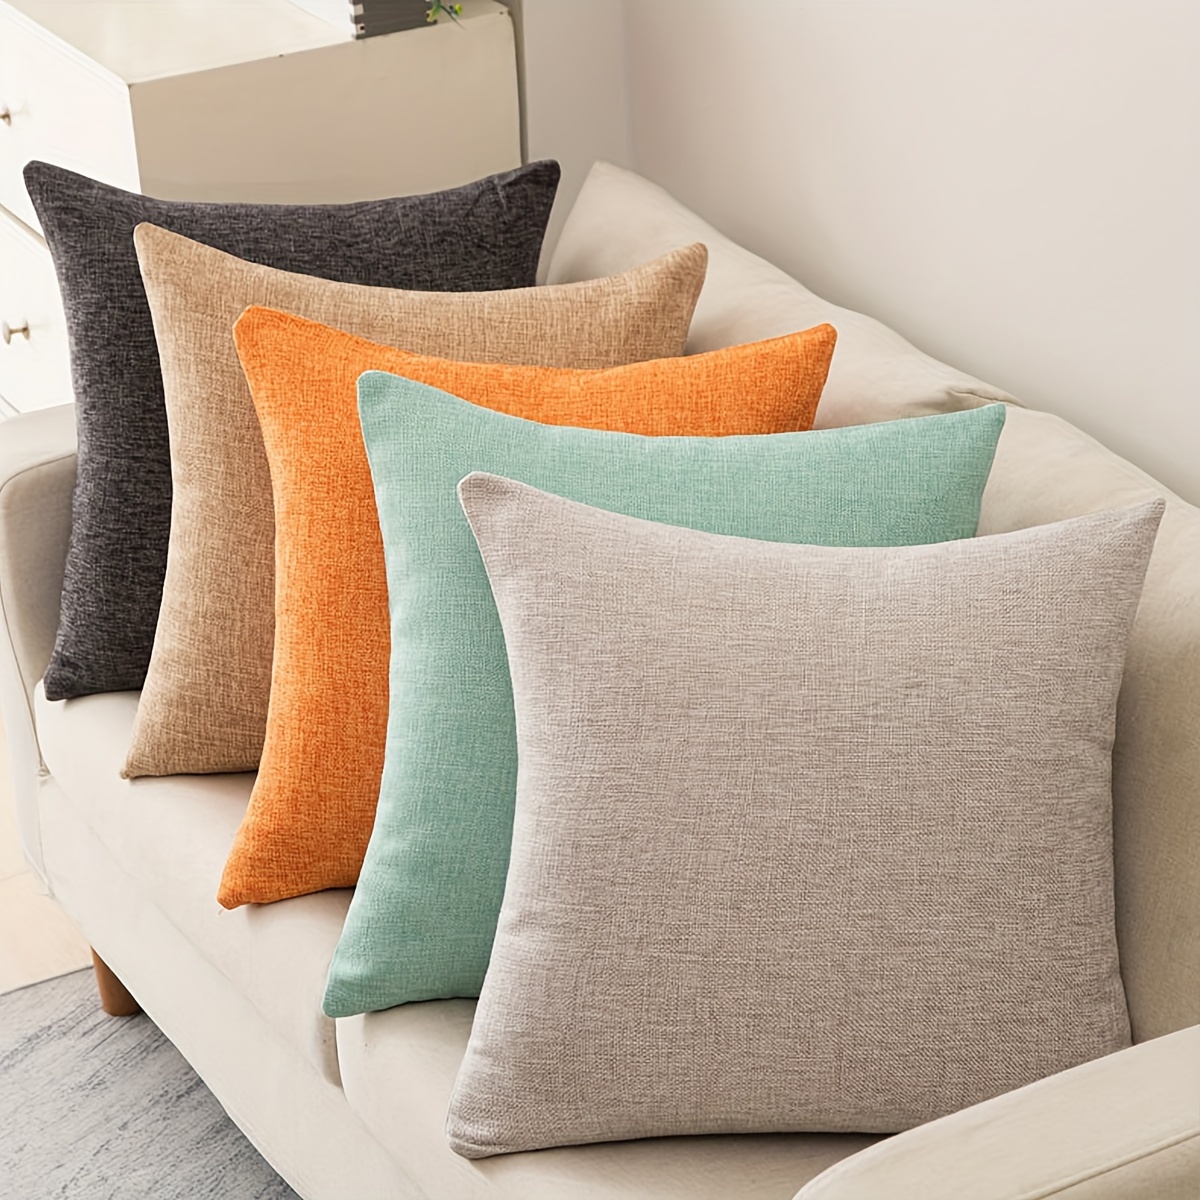 

Solid Color Pillow Covers, Decorative Cushion Cases, Multiple Sizes (15.7"x15.7", 17.7"x17.7", 19.6"x19.6", 21.6"x21.6"), Sofa And Home Decor, No Insert